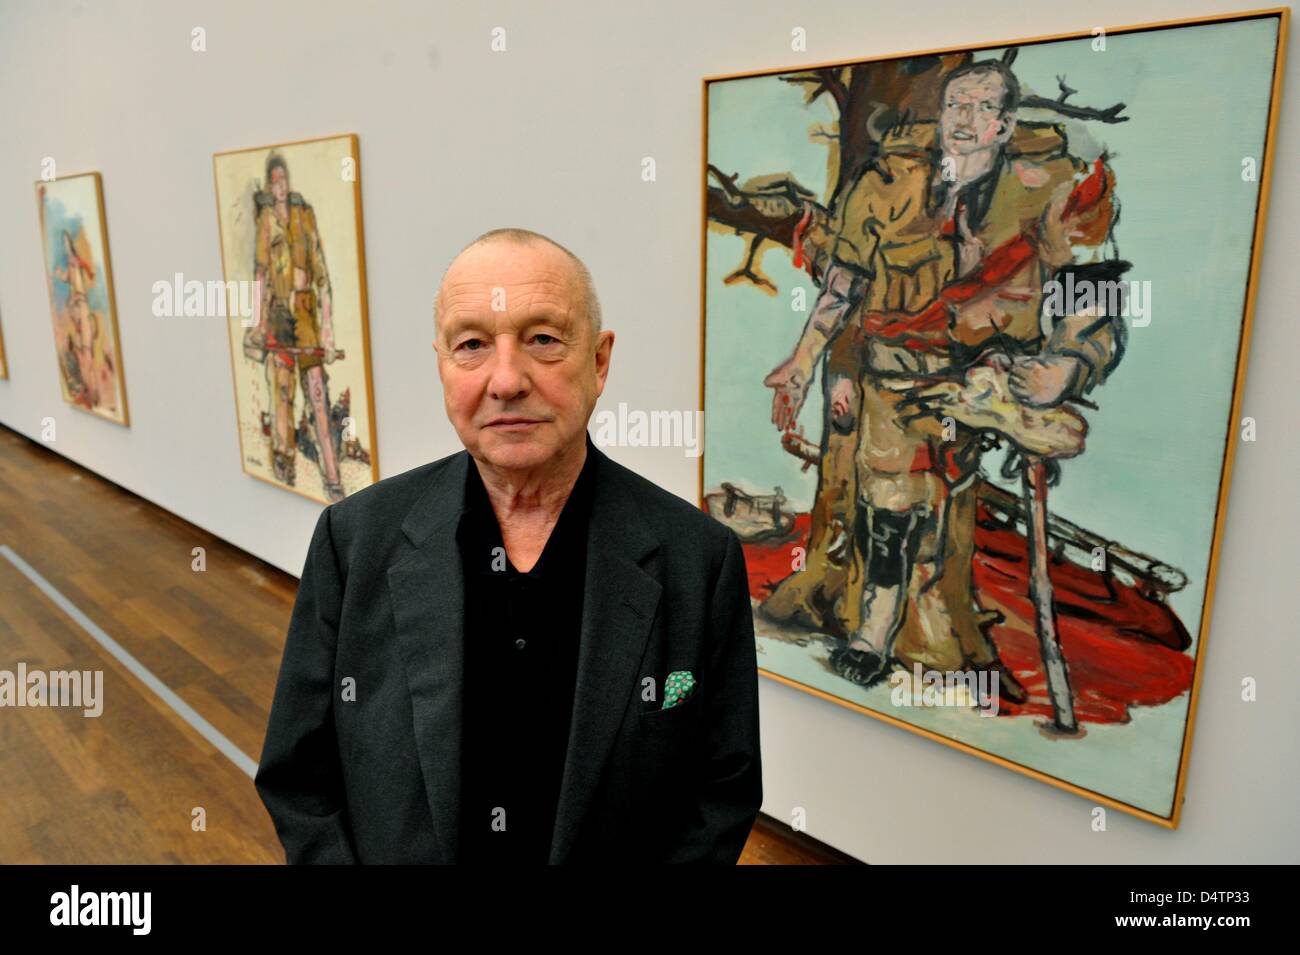 German artist Georg Baselitz stands in front of the painting ?Versperrter Maler? (?Barred Painter?, 1965) in the exhibition ?Baselitz? at Frieder Burda Museum in Baden-Baden, Germany, 17 November 2009. The exhibition offers a comprehensive insight into the artistic work of Georg Baselitz and will be on display at Frieder Burda Museum and Staatliche Kunsthalle Baden-Baden from 21 No Stock Photo